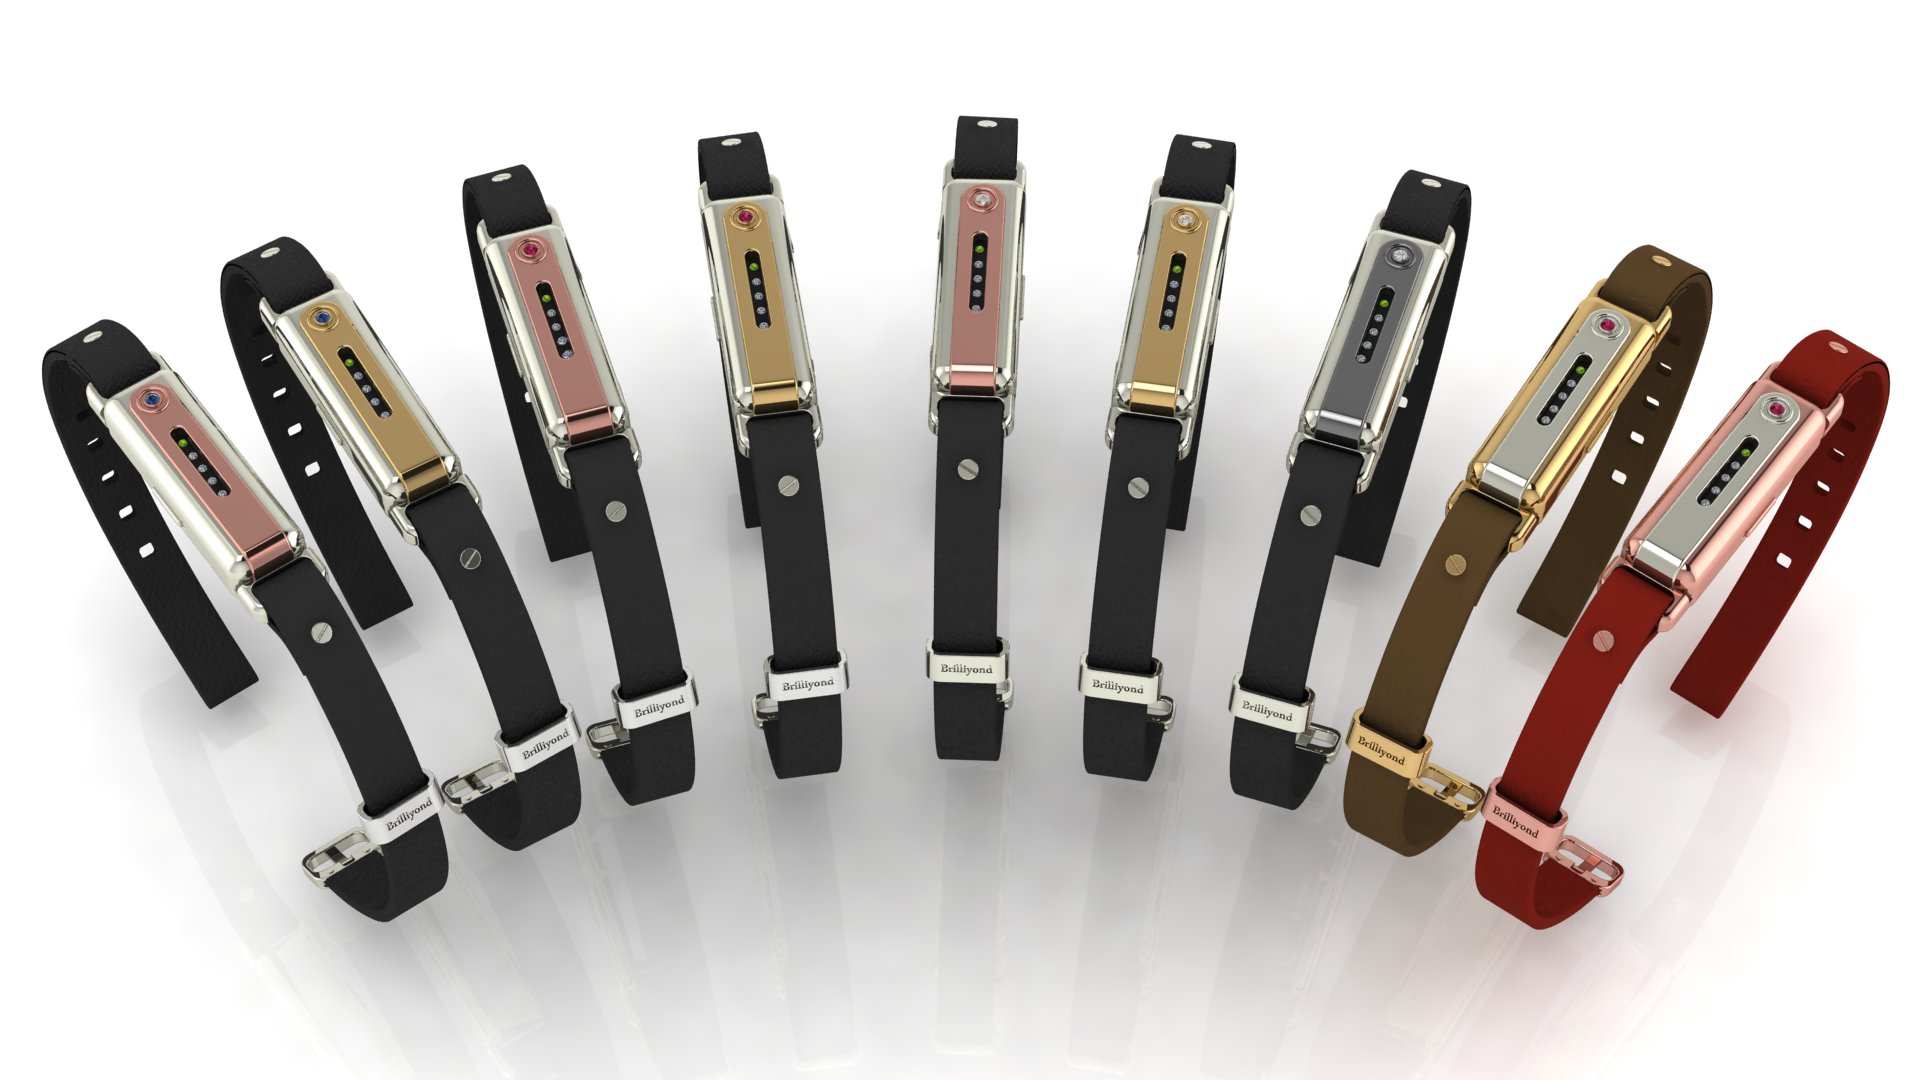 Brilliyond Smart Fitbit Bangles in different colours and styles.